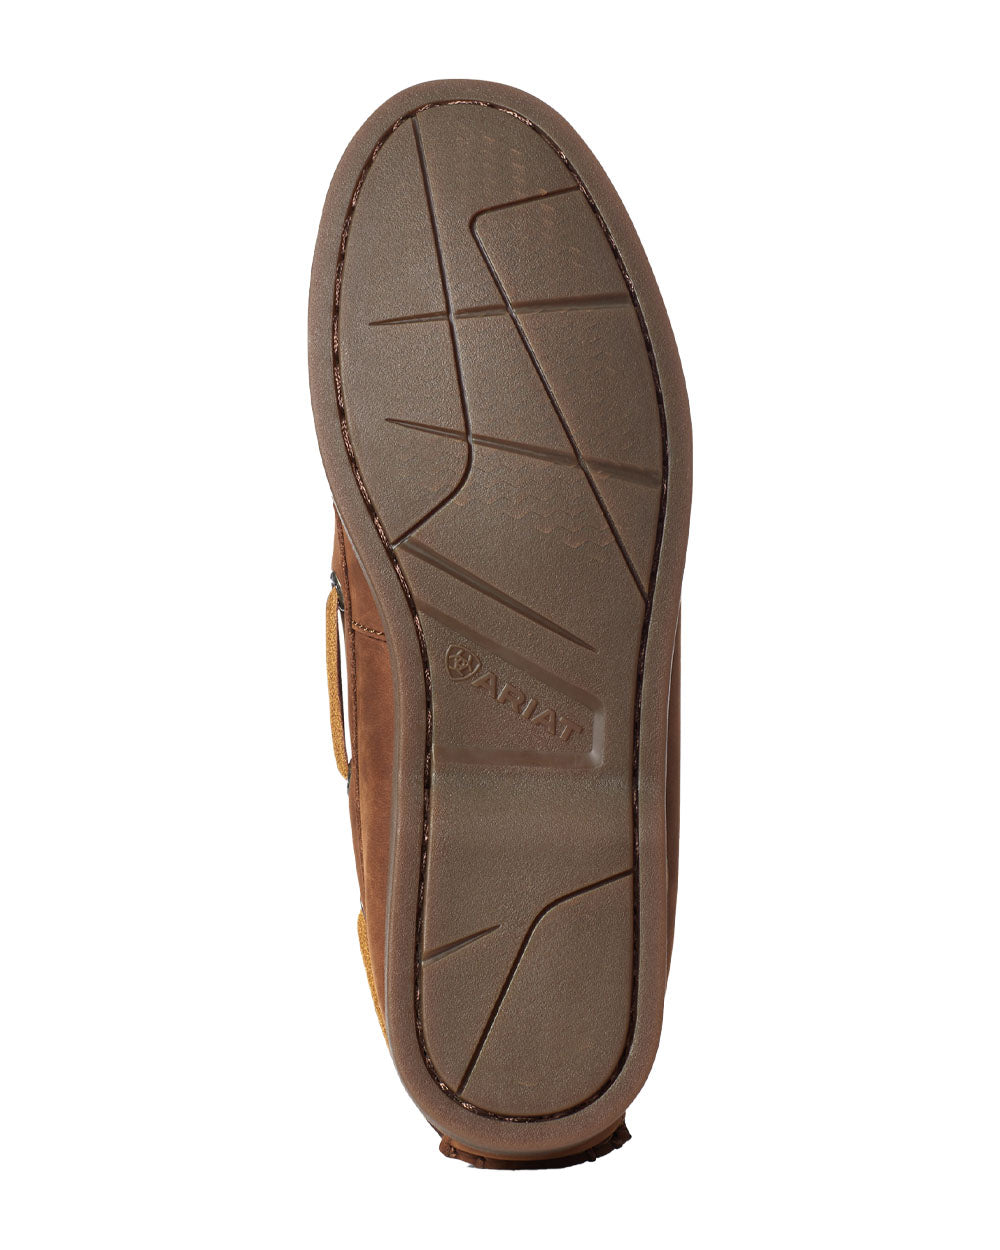 Walnut coloured Ariat Womens Antigua Boat Shoes Sole on White background 